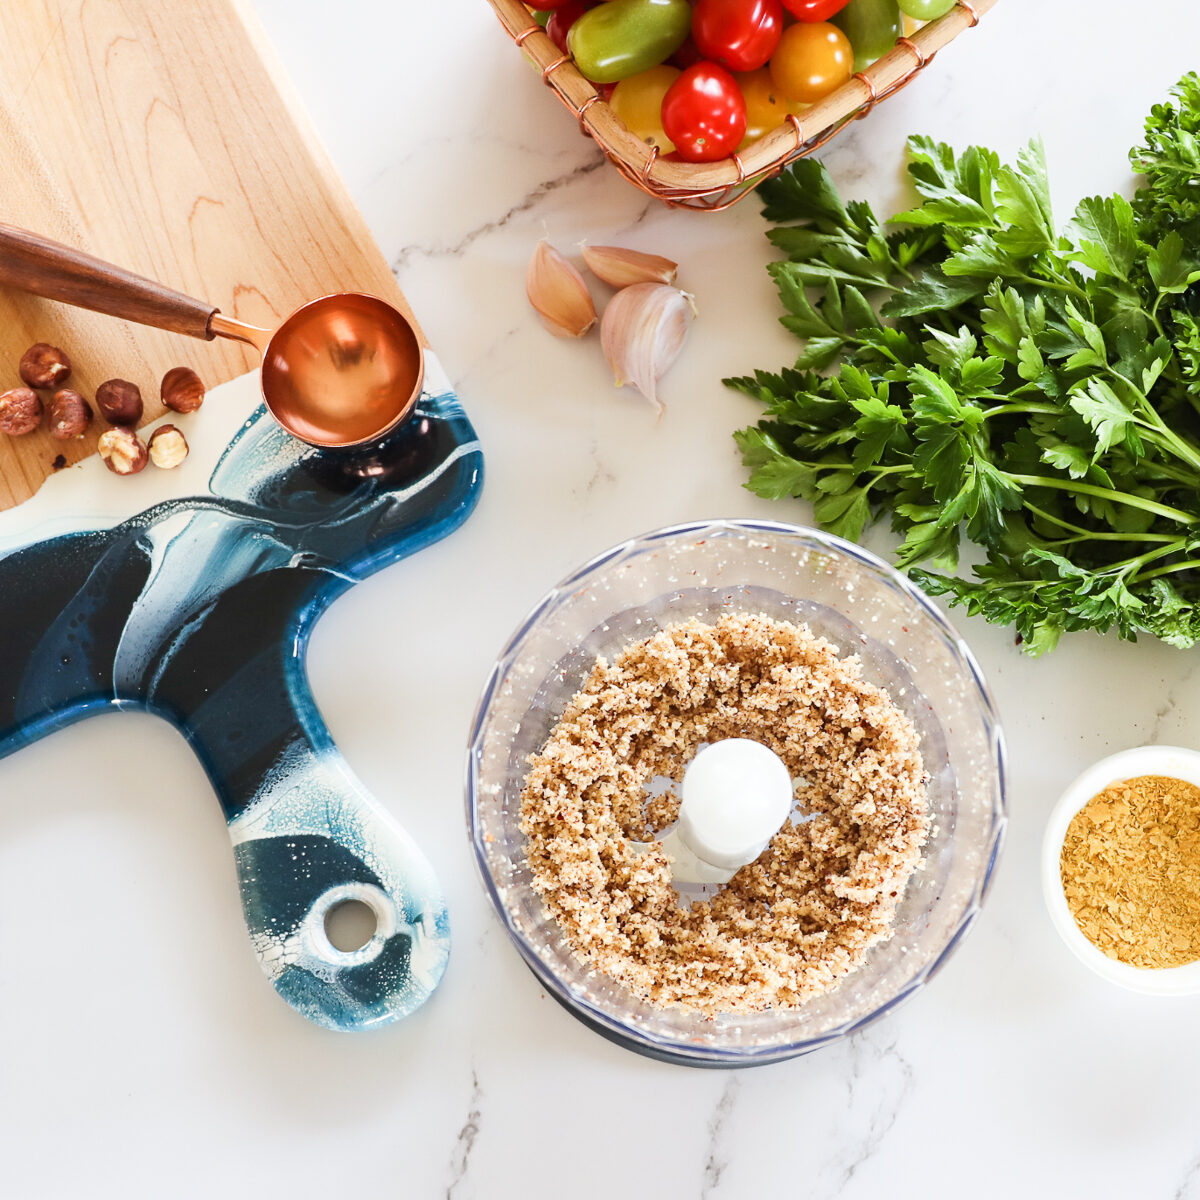 Bowl of food processor with finely ground hazelnuts in it. There are cherry tomatoes, parsley, nutritional yeast, hazelnuts and garlic cloves around it on the white countertop.